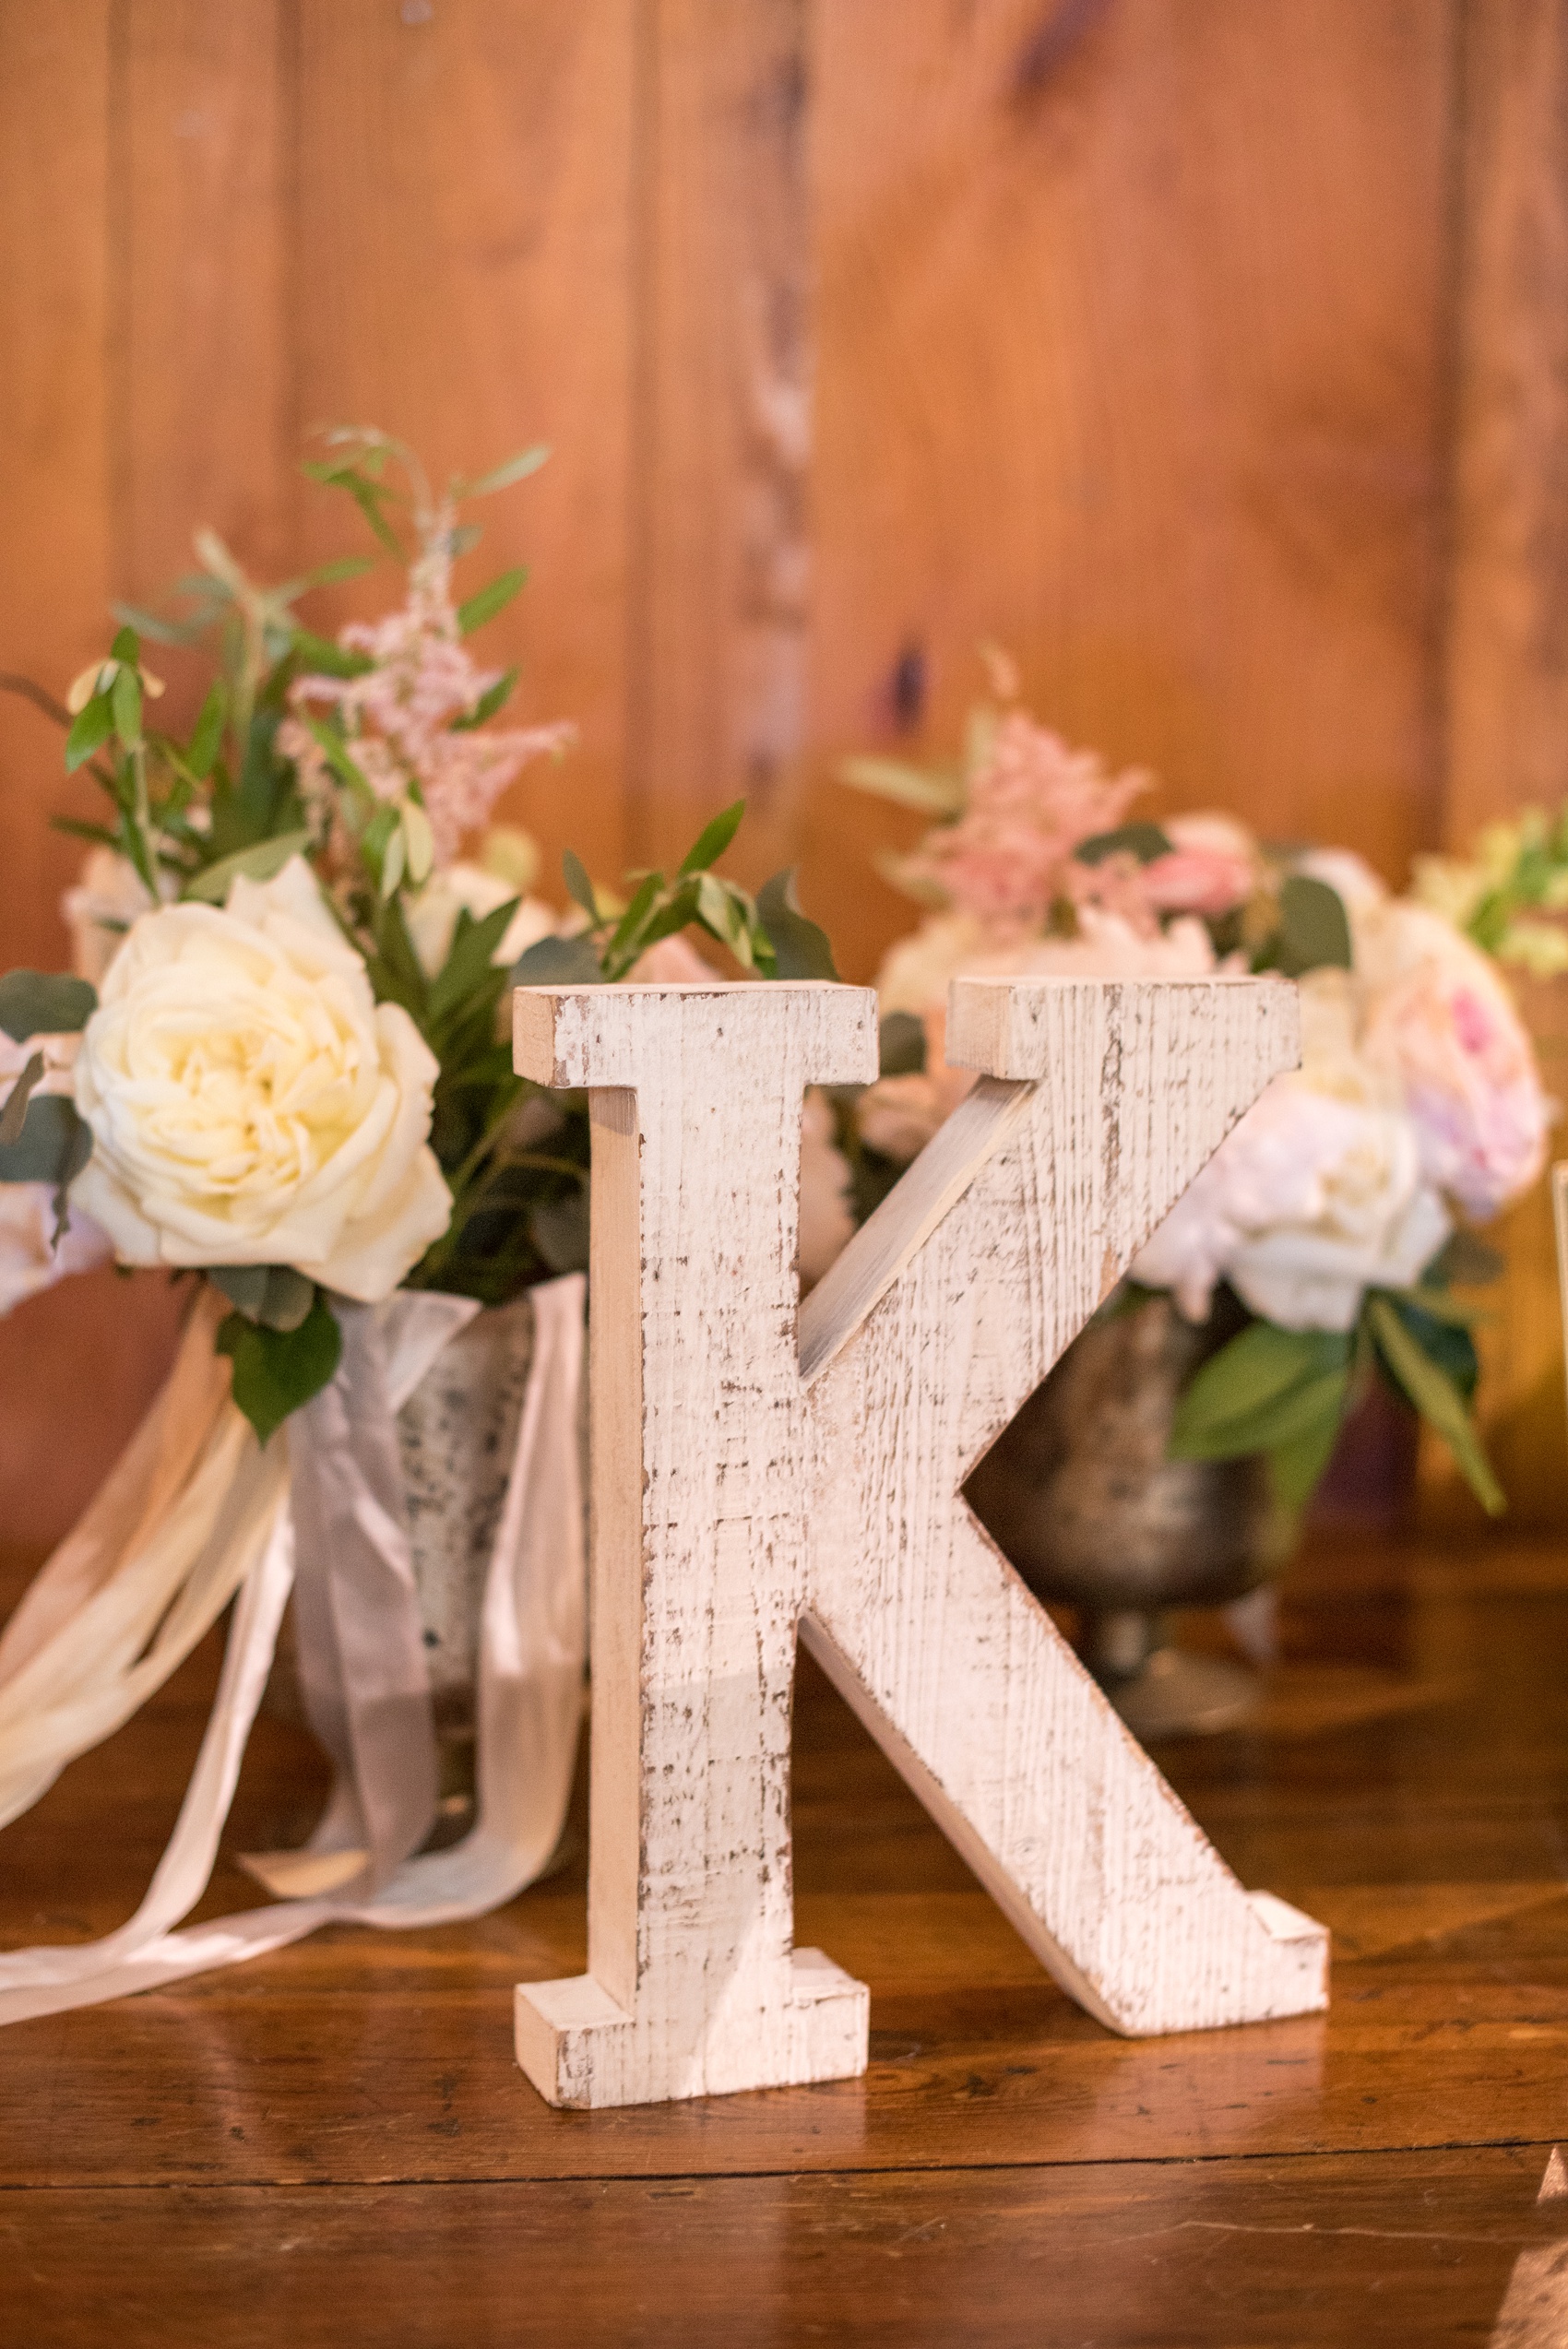 Pavilion at Angus Barn wedding photos by Mikkel Paige Photography. Picture of a rustic white, shabby chic inspired K monogram wood block on the framed photo table.